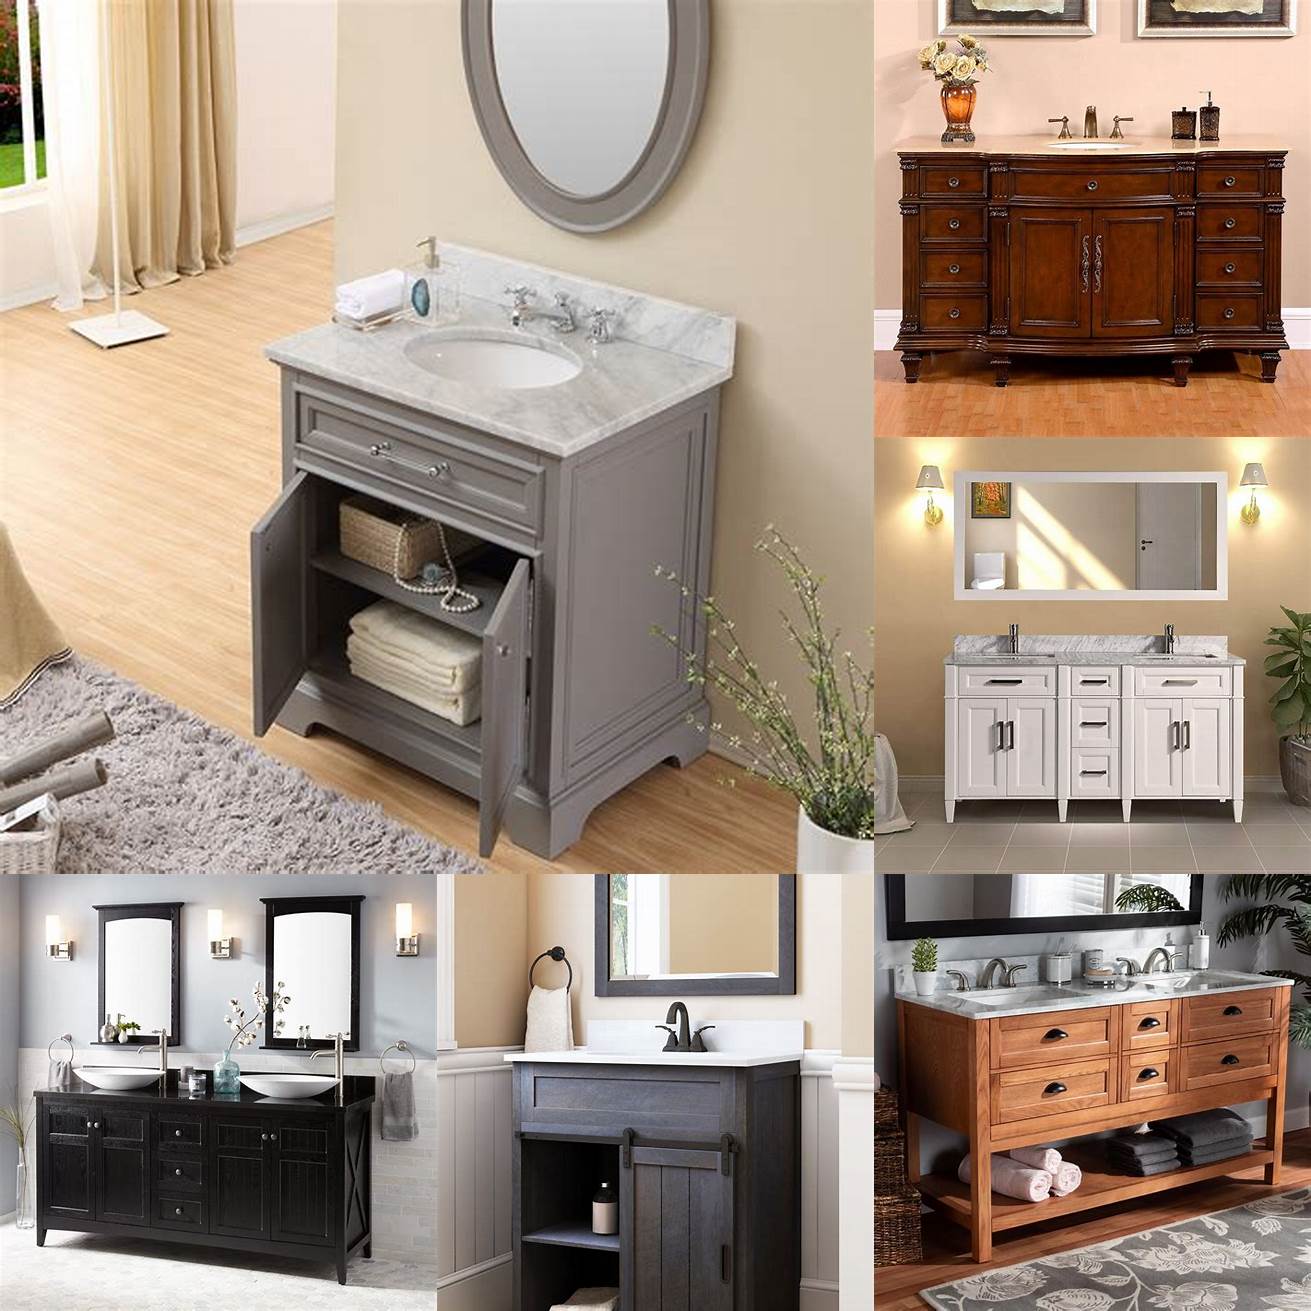 Browse their website and select the bathroom vanity you would like to purchase